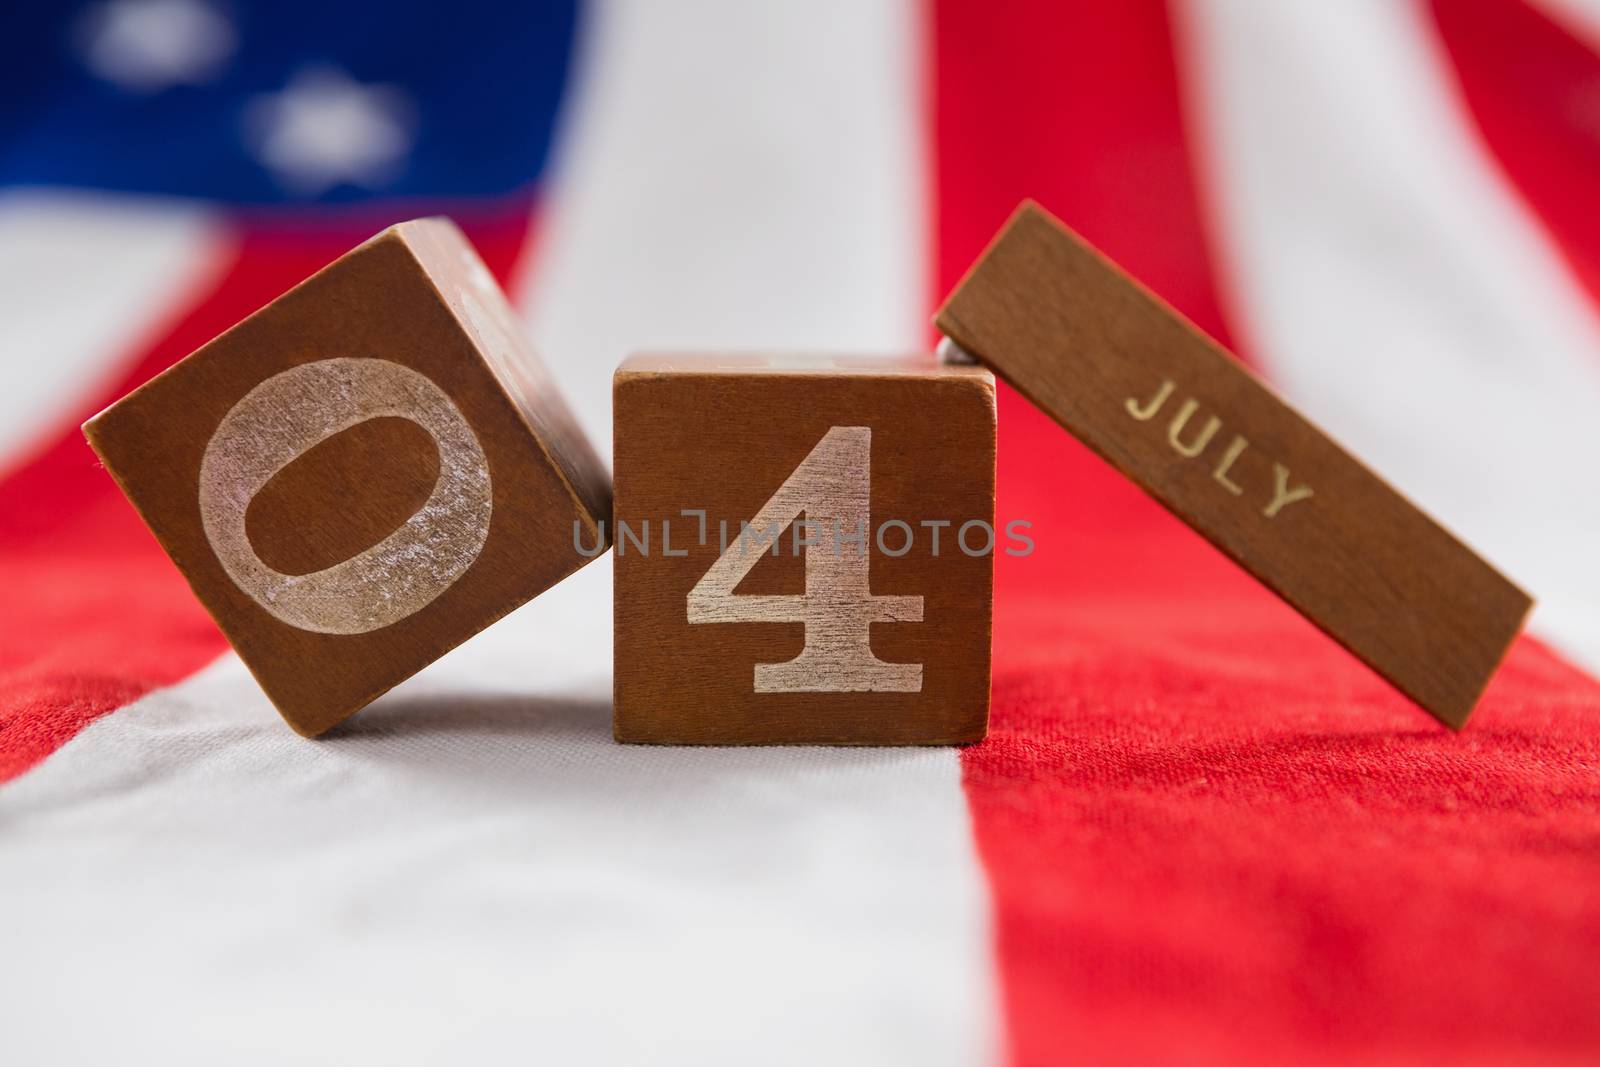 Close-up of date blocks on American flag with 4th july theme